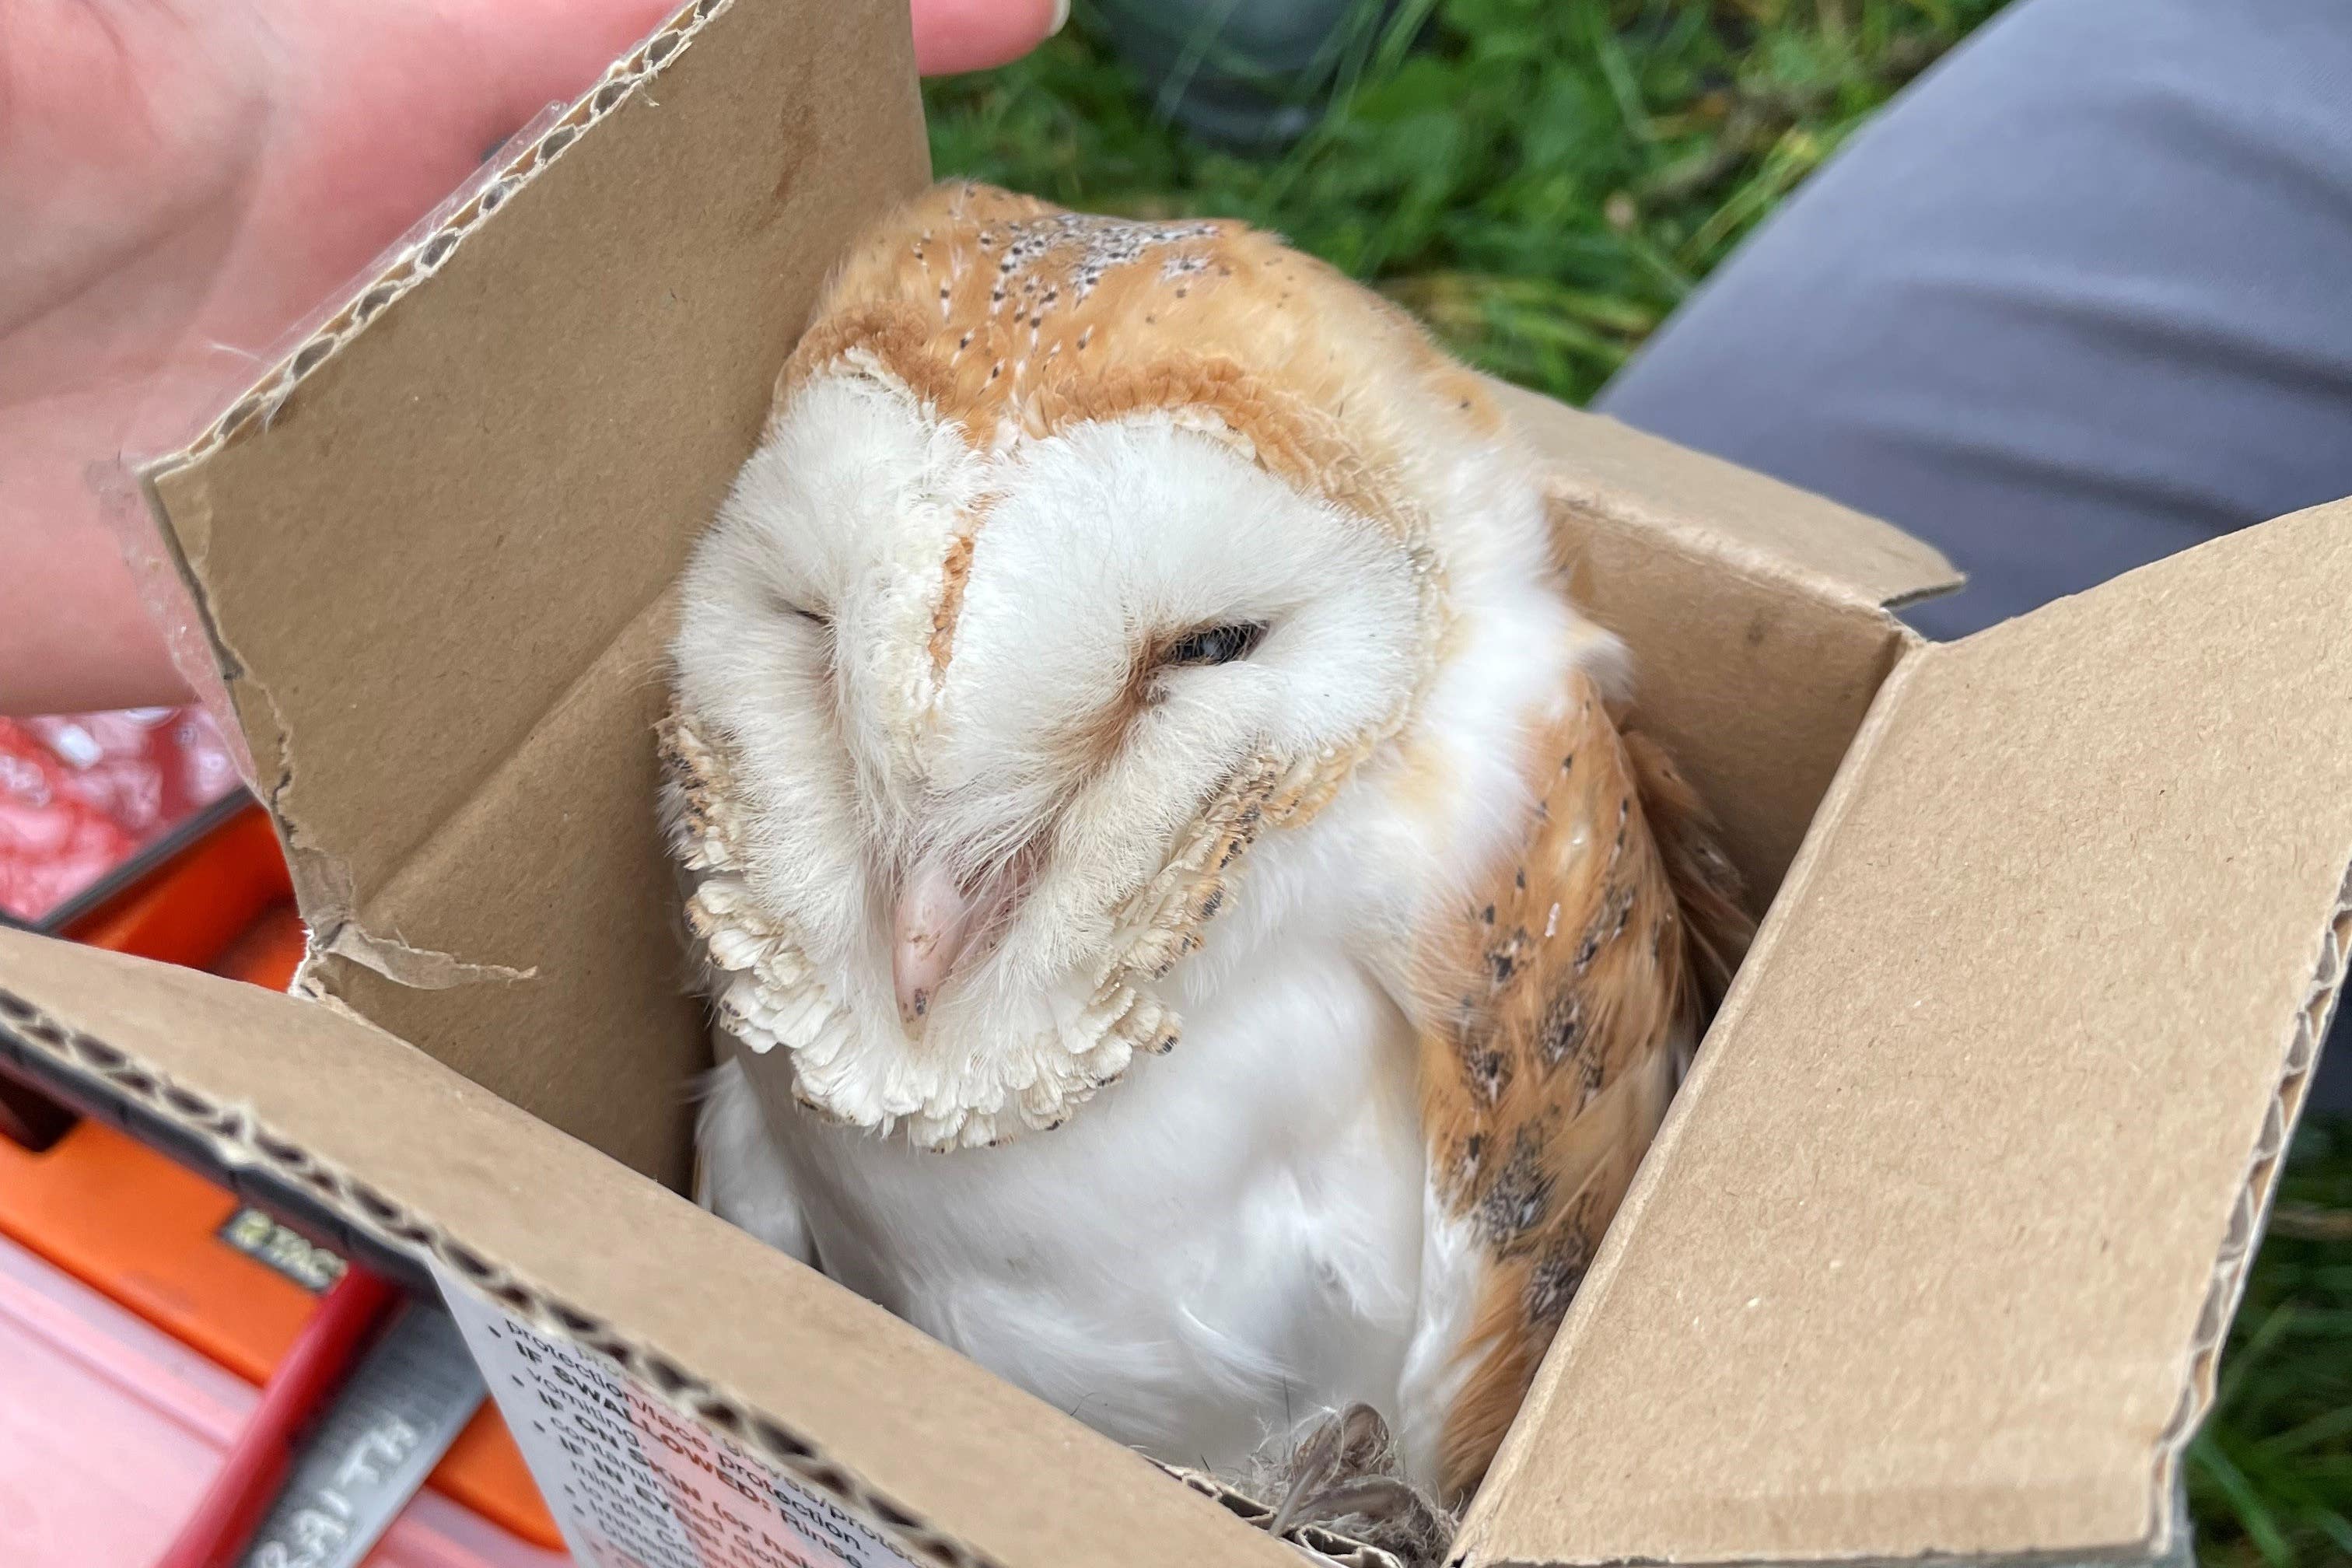 Four barn owl chicks defied the odds this winter as the latest recorded brood in Northern Ireland to date (Handout/PA)